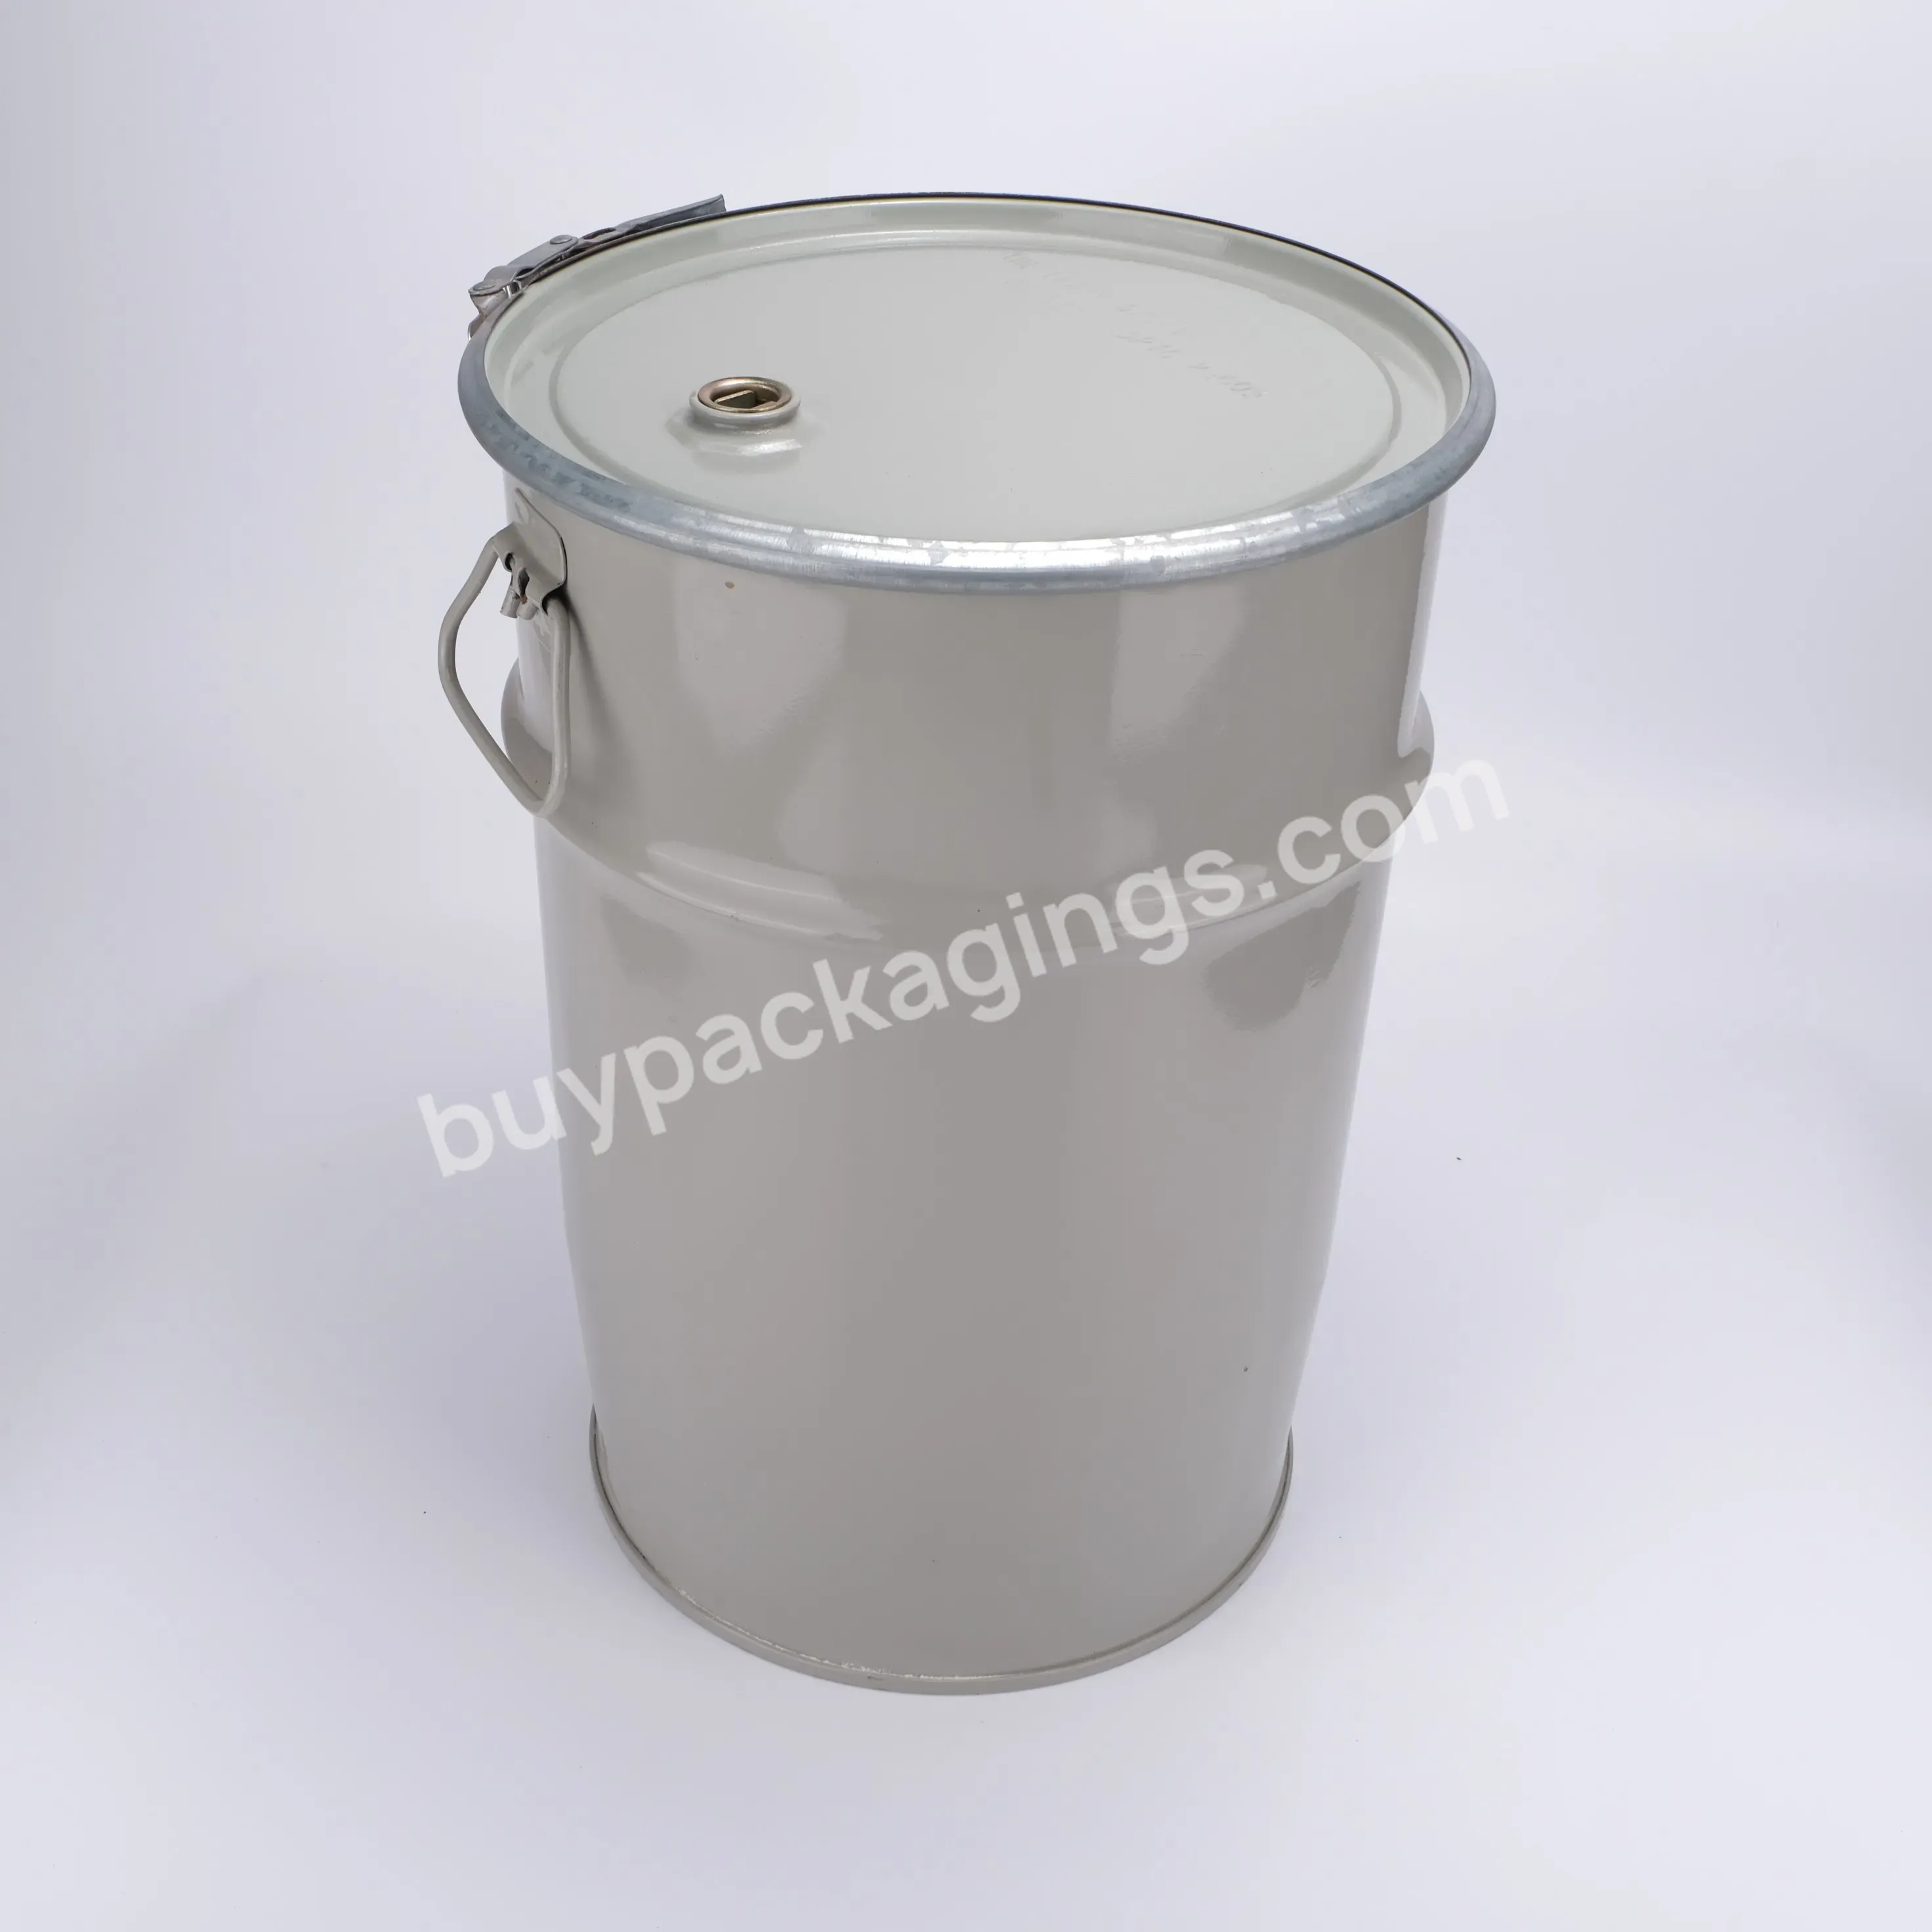 5 Gallon 20 Liters Portable High Quality Metal Steel Pails Bucket Drum Barrel With Lid For Paint Container Sale - Buy Steel Metal Drums Barrel,5 Gallon Steel Bucket With Lid,Steel Pails 20 Liters.